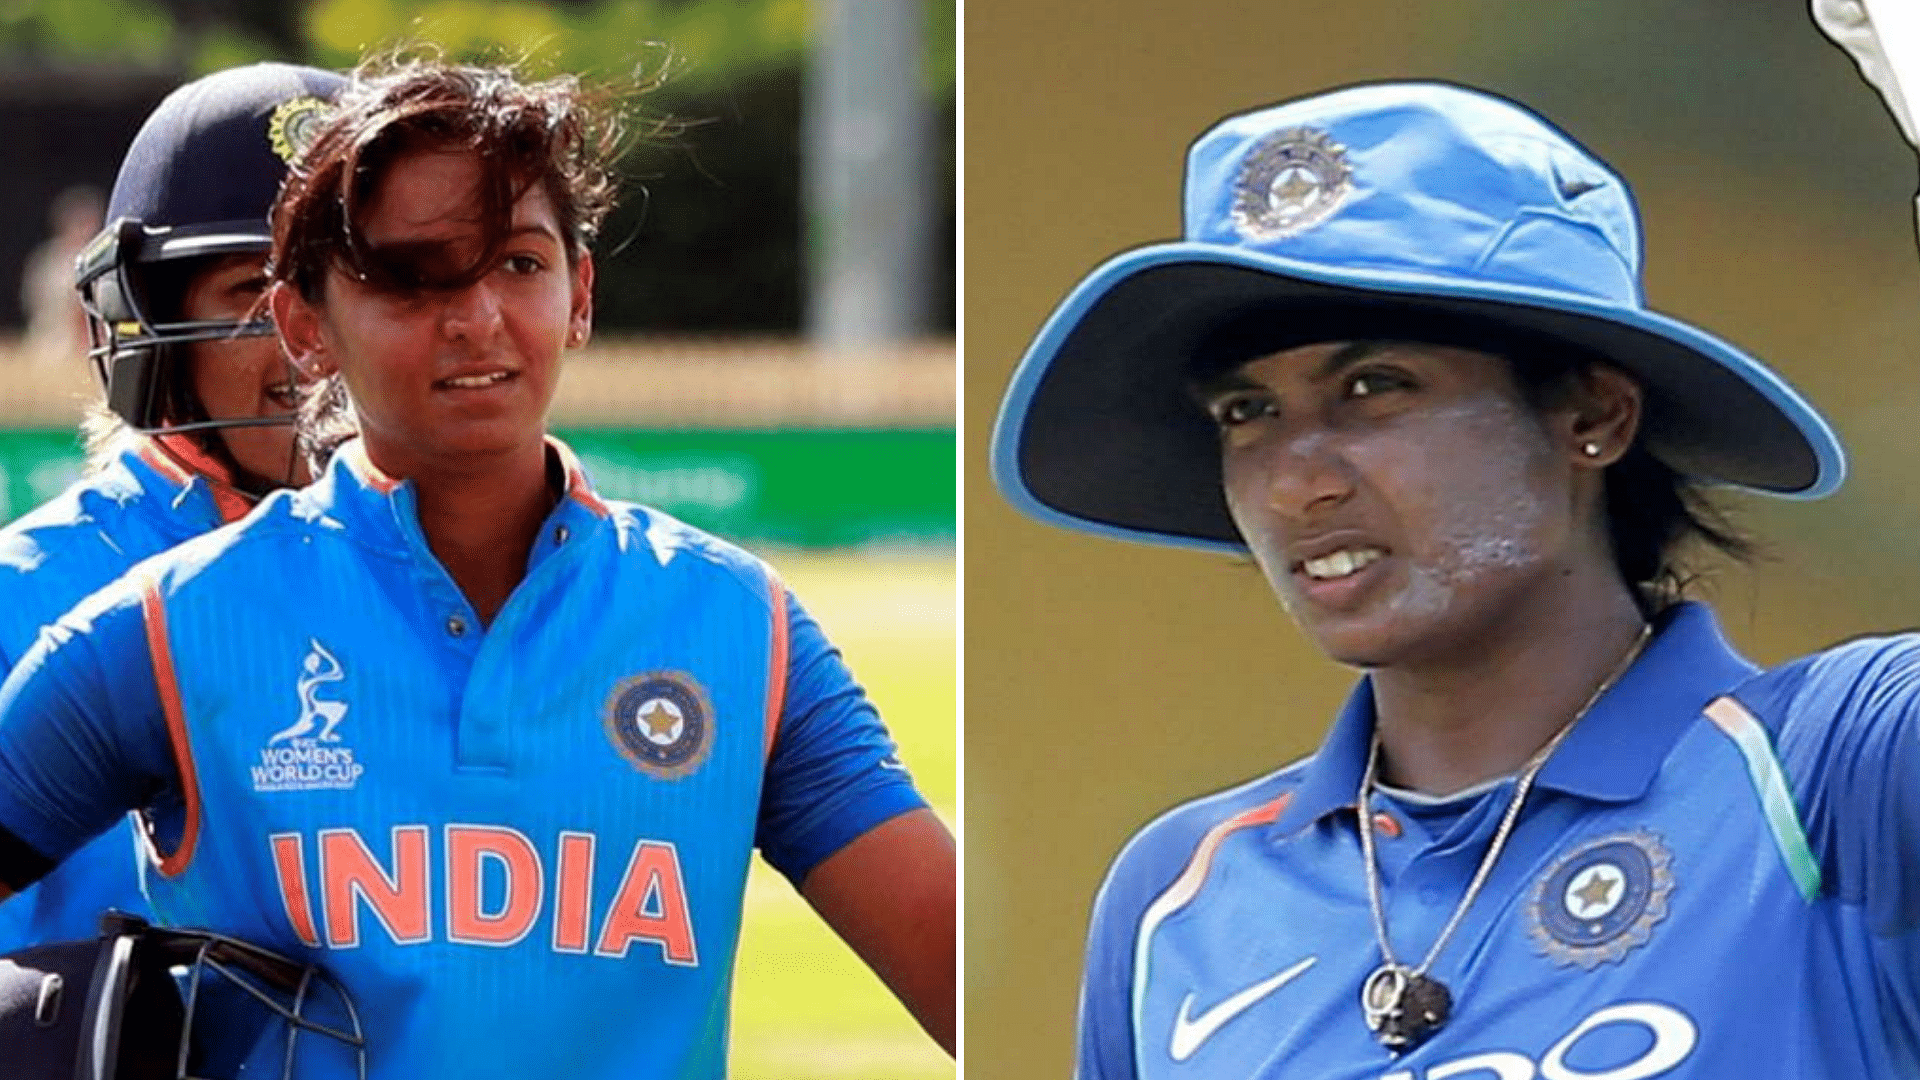 Harmanpreet Kaur defended the decision to leave a fit again Mithali Raj out of the Indian line-up in the Women’s World T20 semi-final against England.